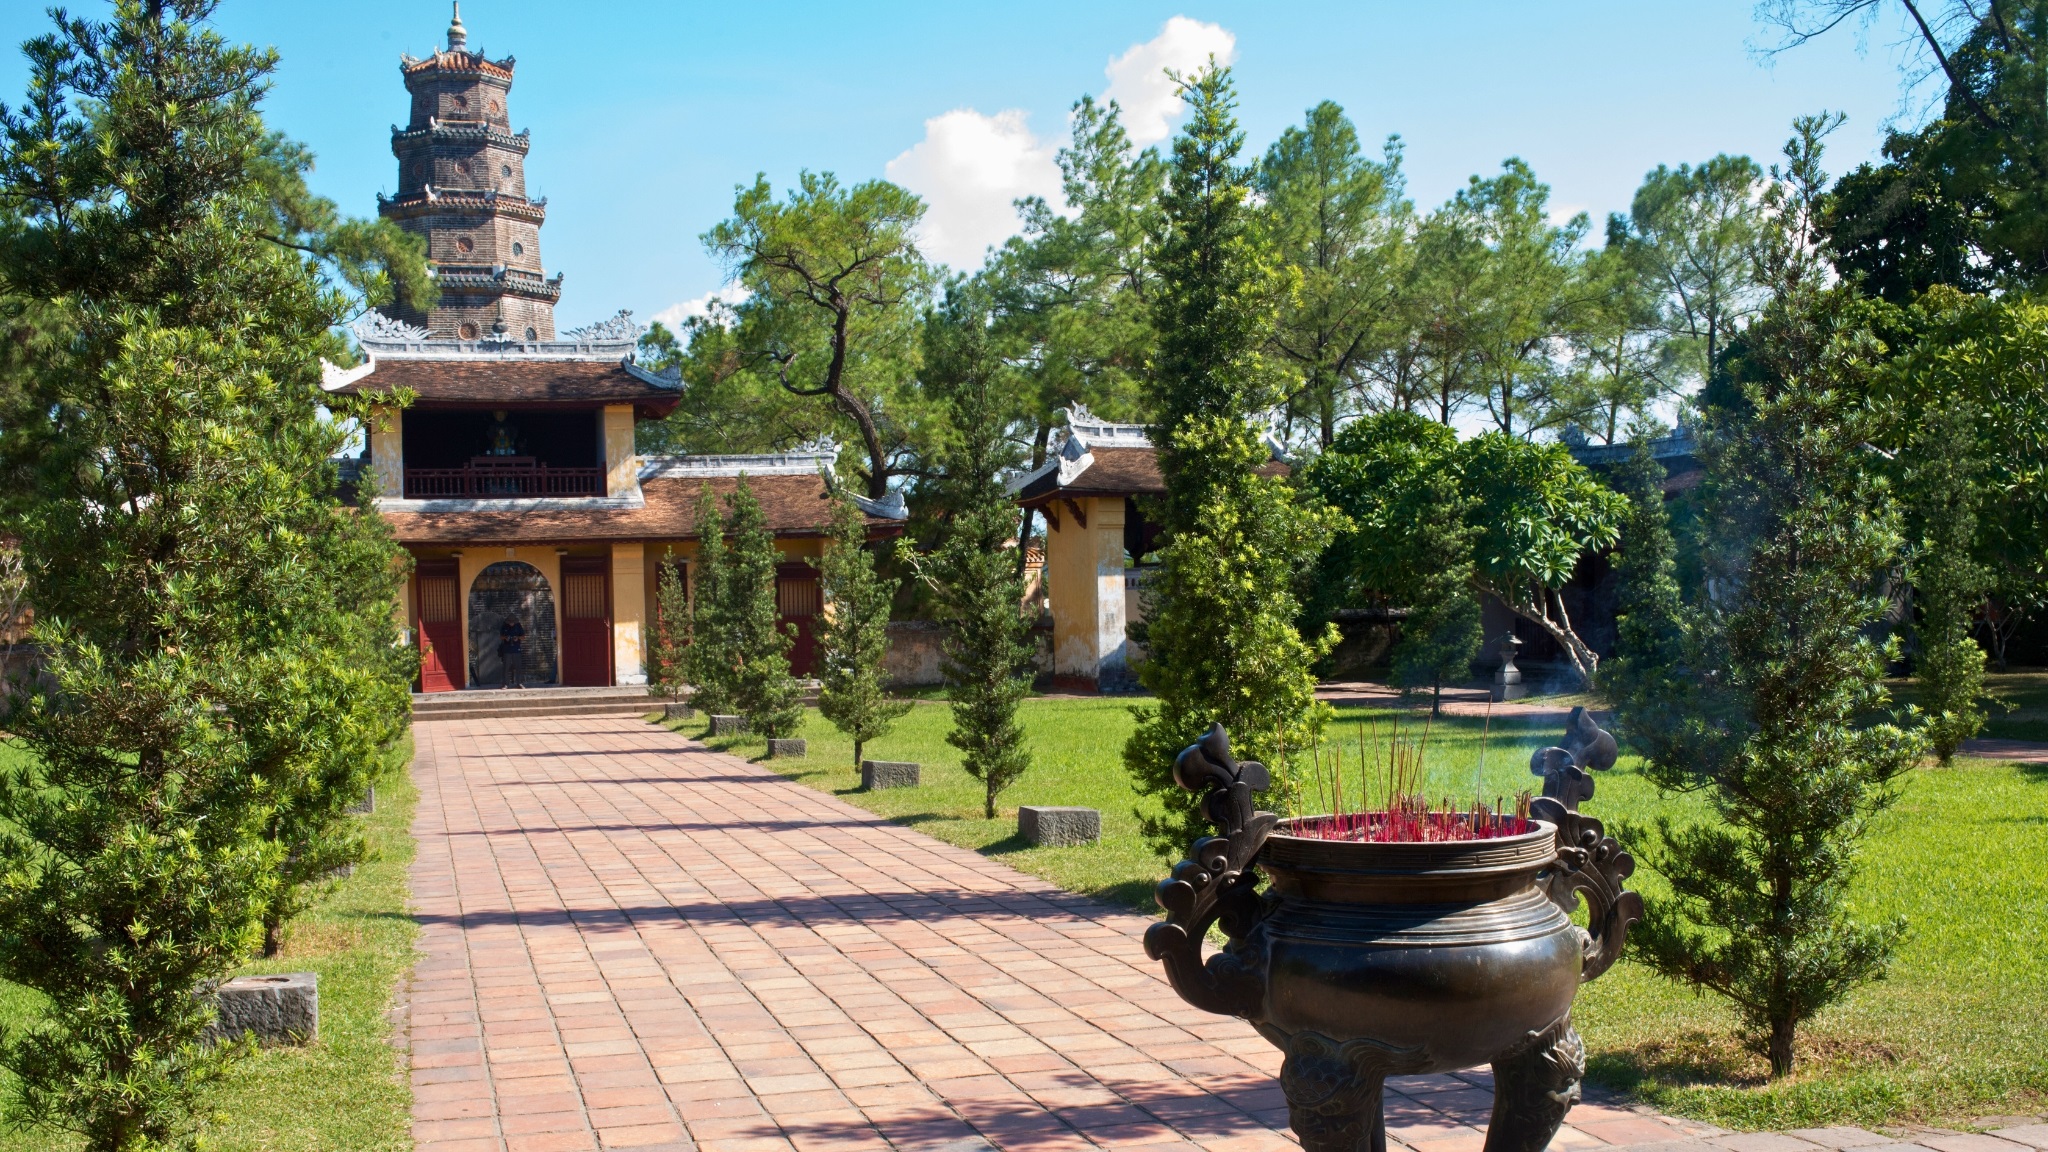 Phuoc Duyen Tower Is The Most Prominent Structure In Thien Mu Pagoda